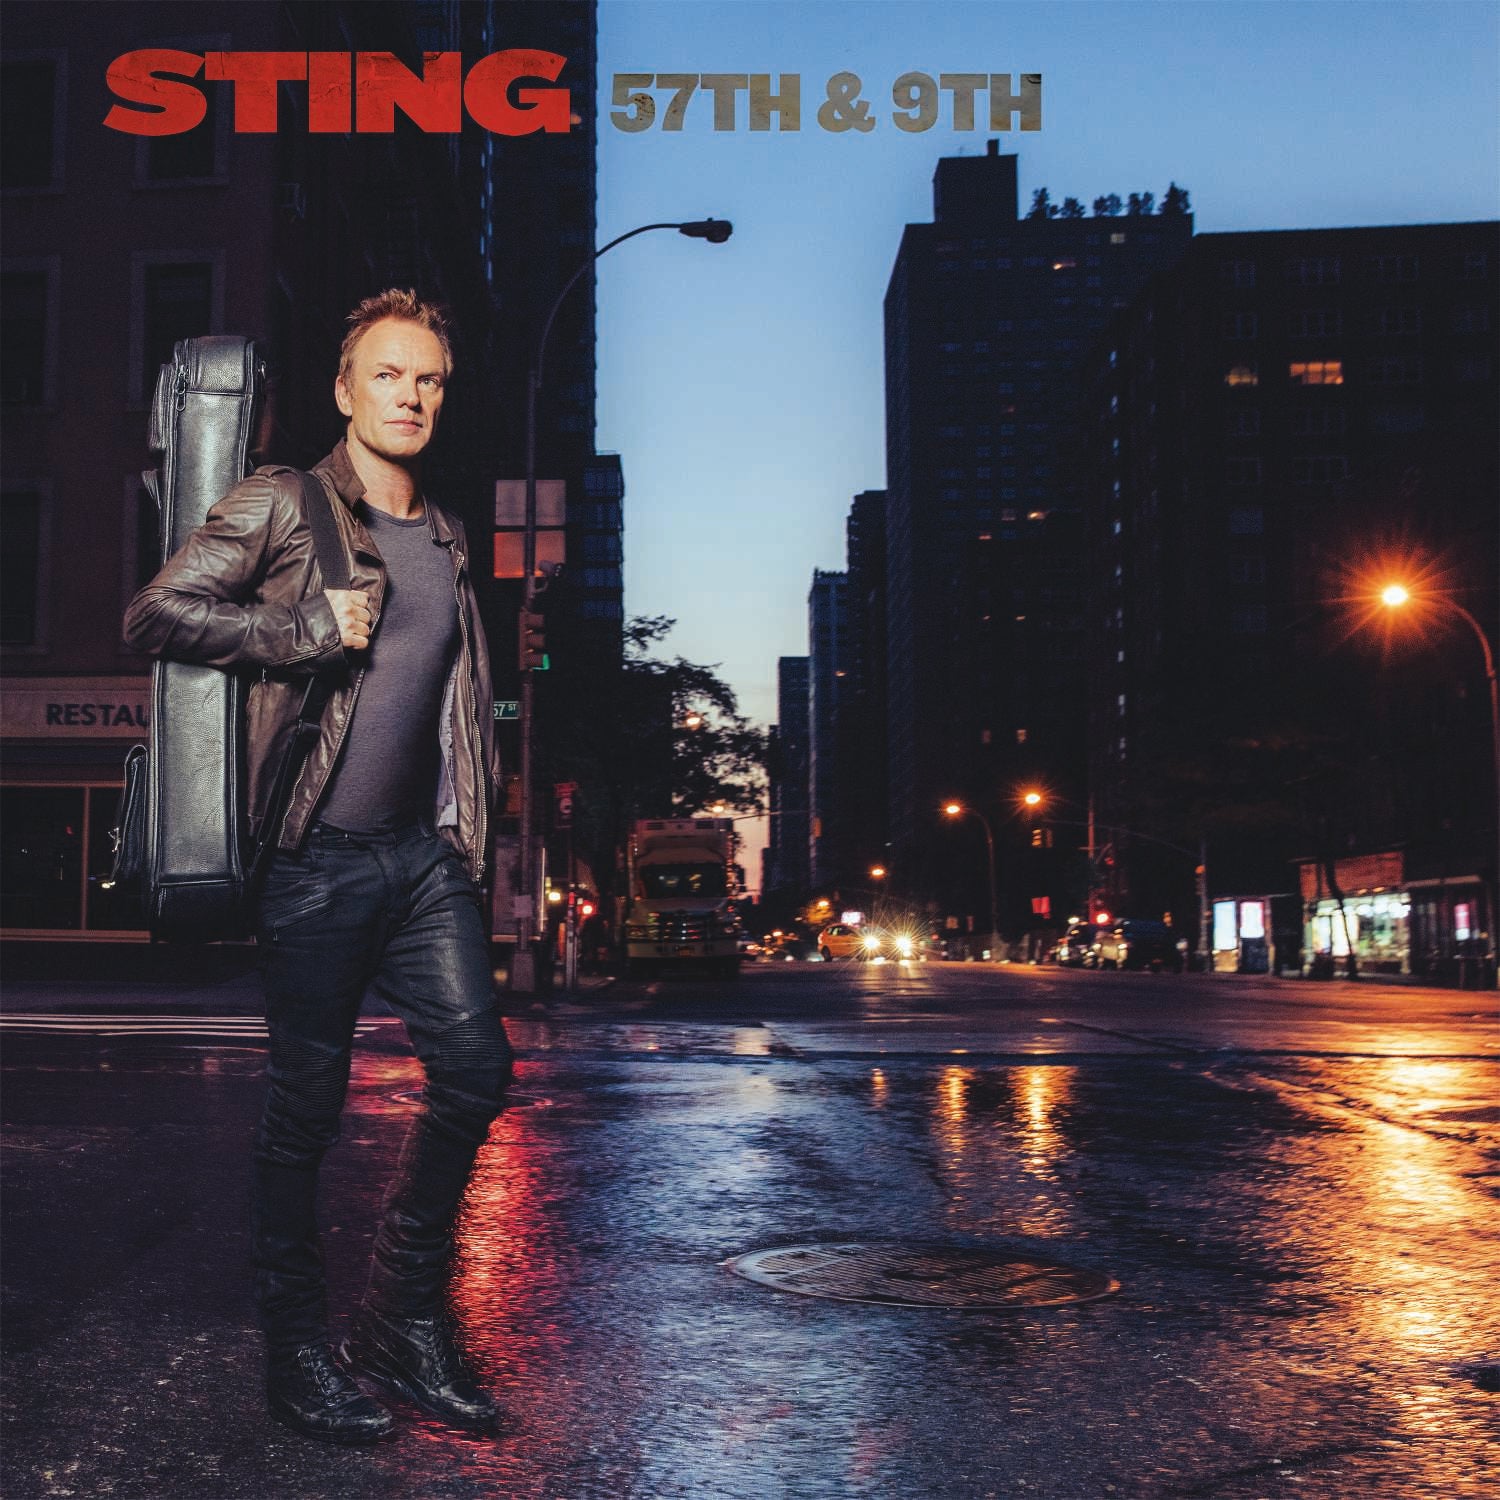 Sting - 57th & 9th: Deluxe CD